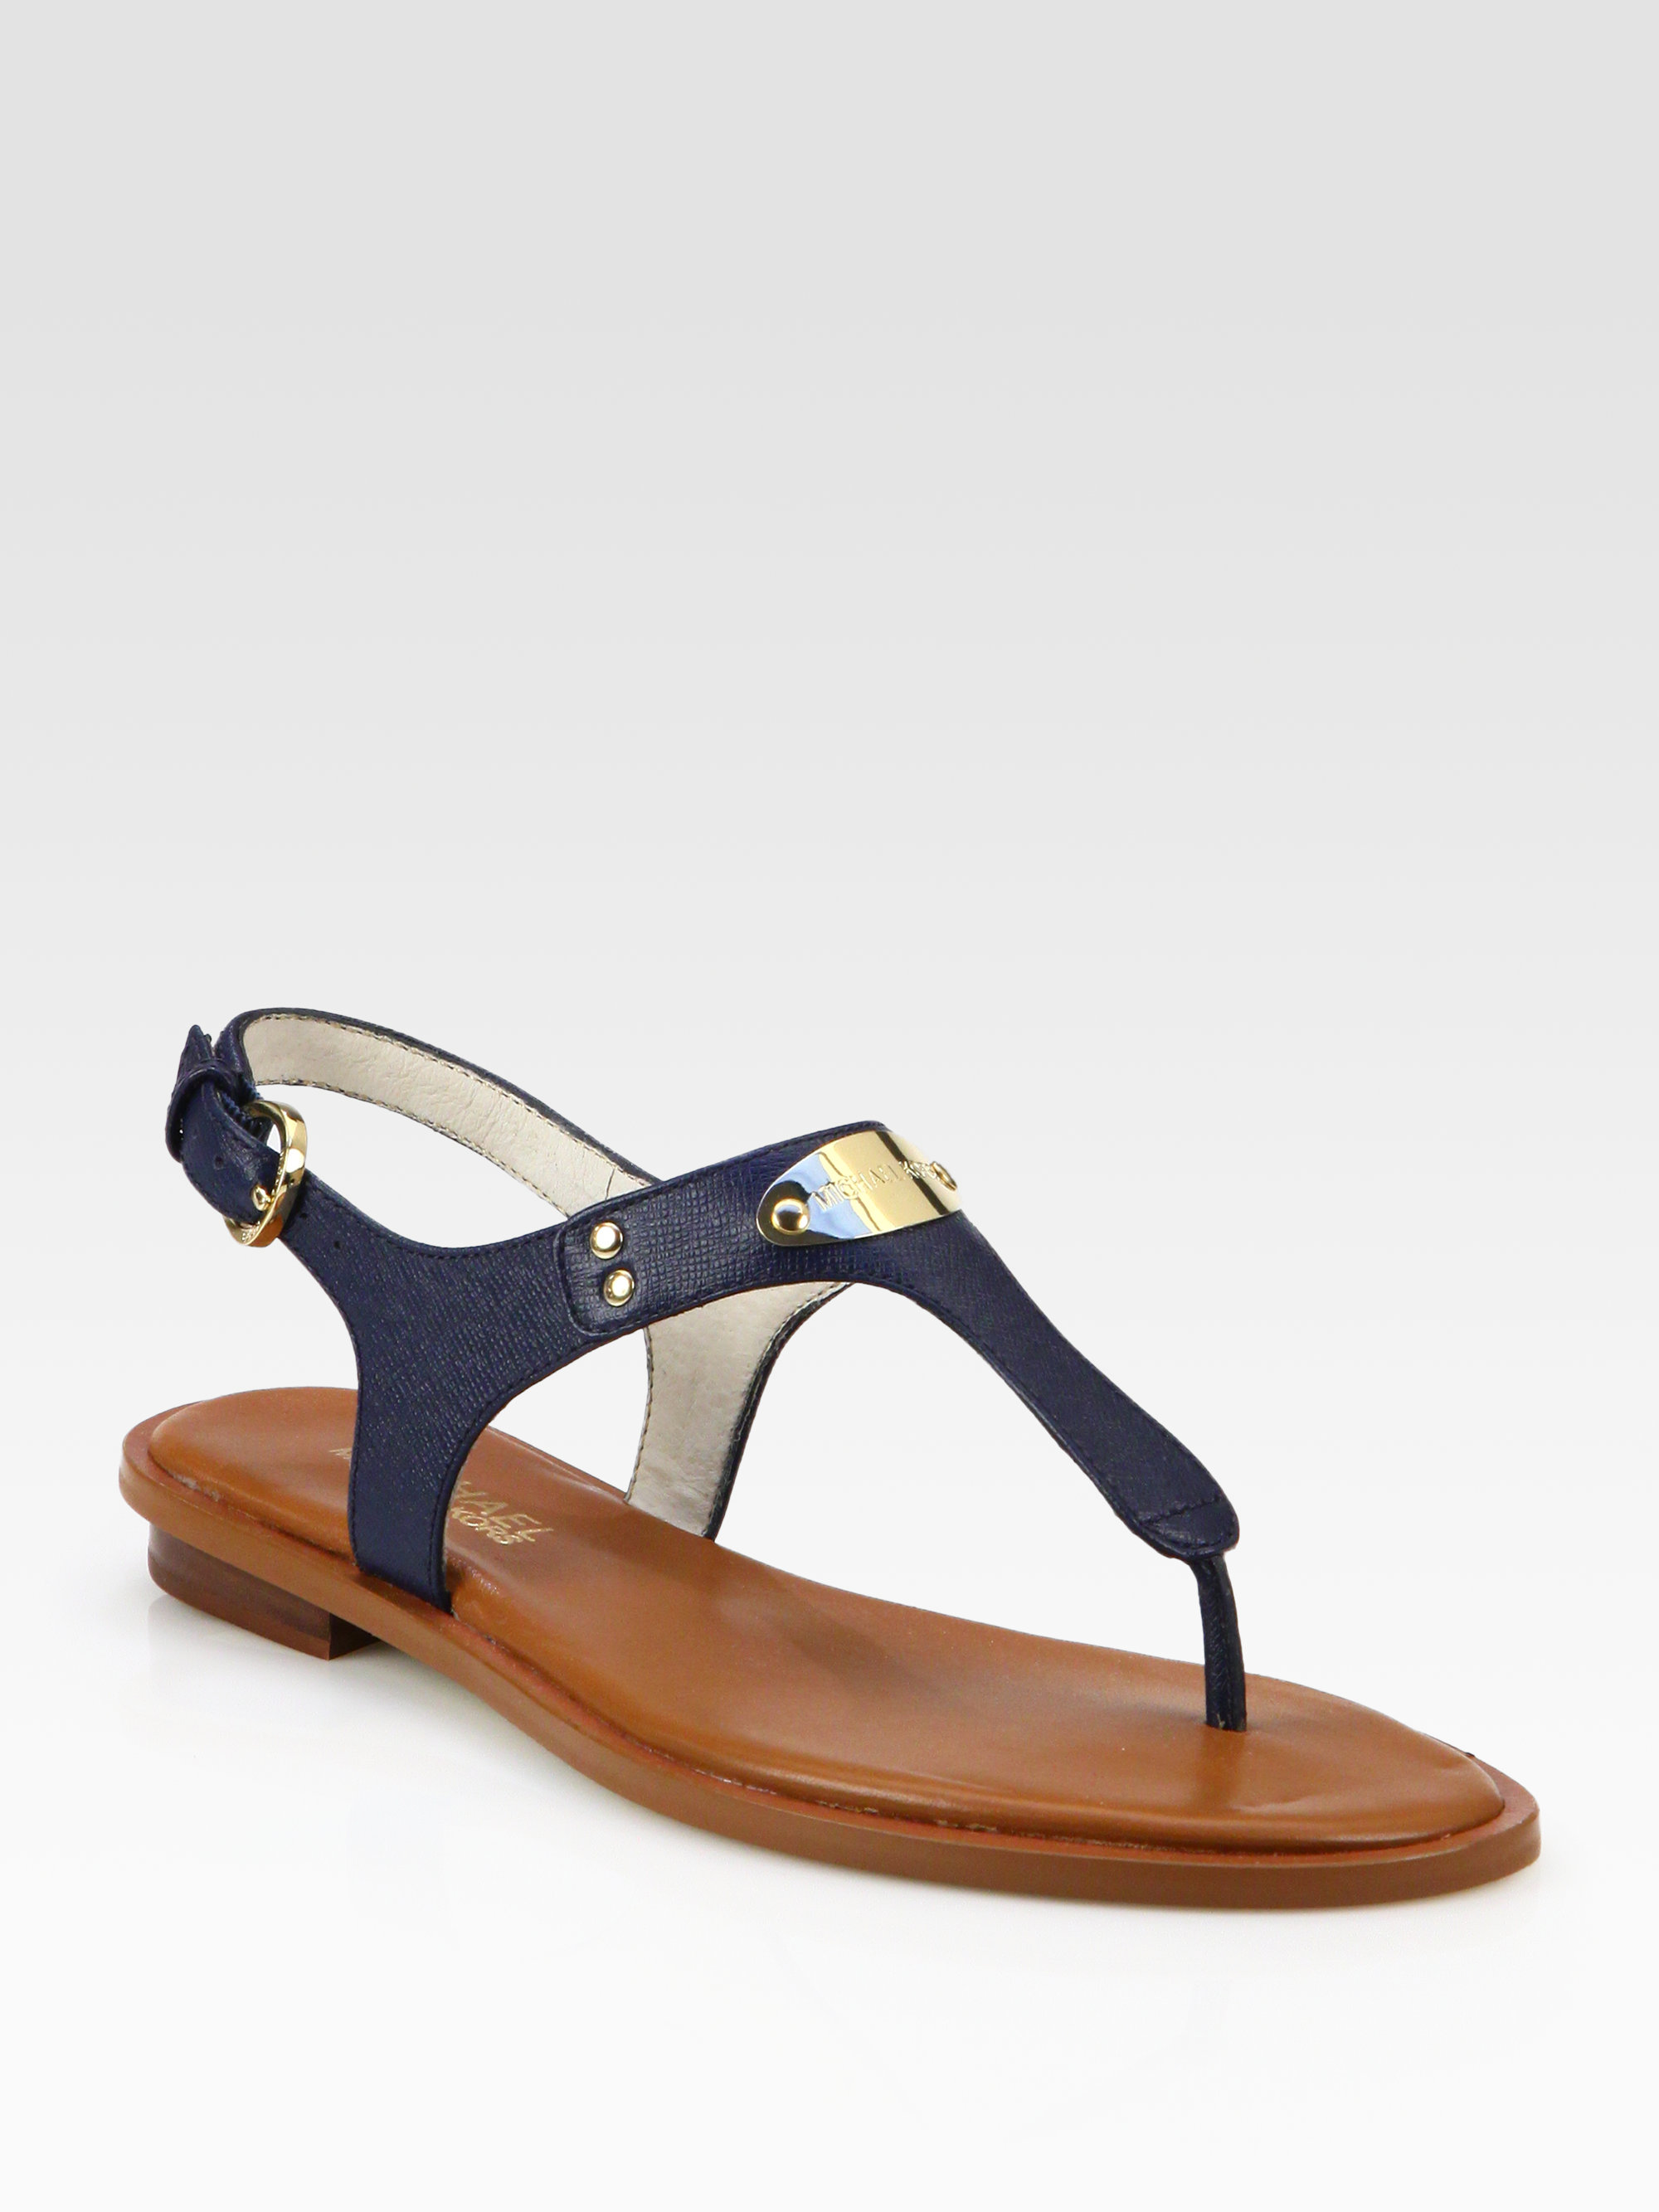 MICHAEL Michael Kors Mk Plate Textured Leather Thong Sandals in Navy (Blue)  - Lyst